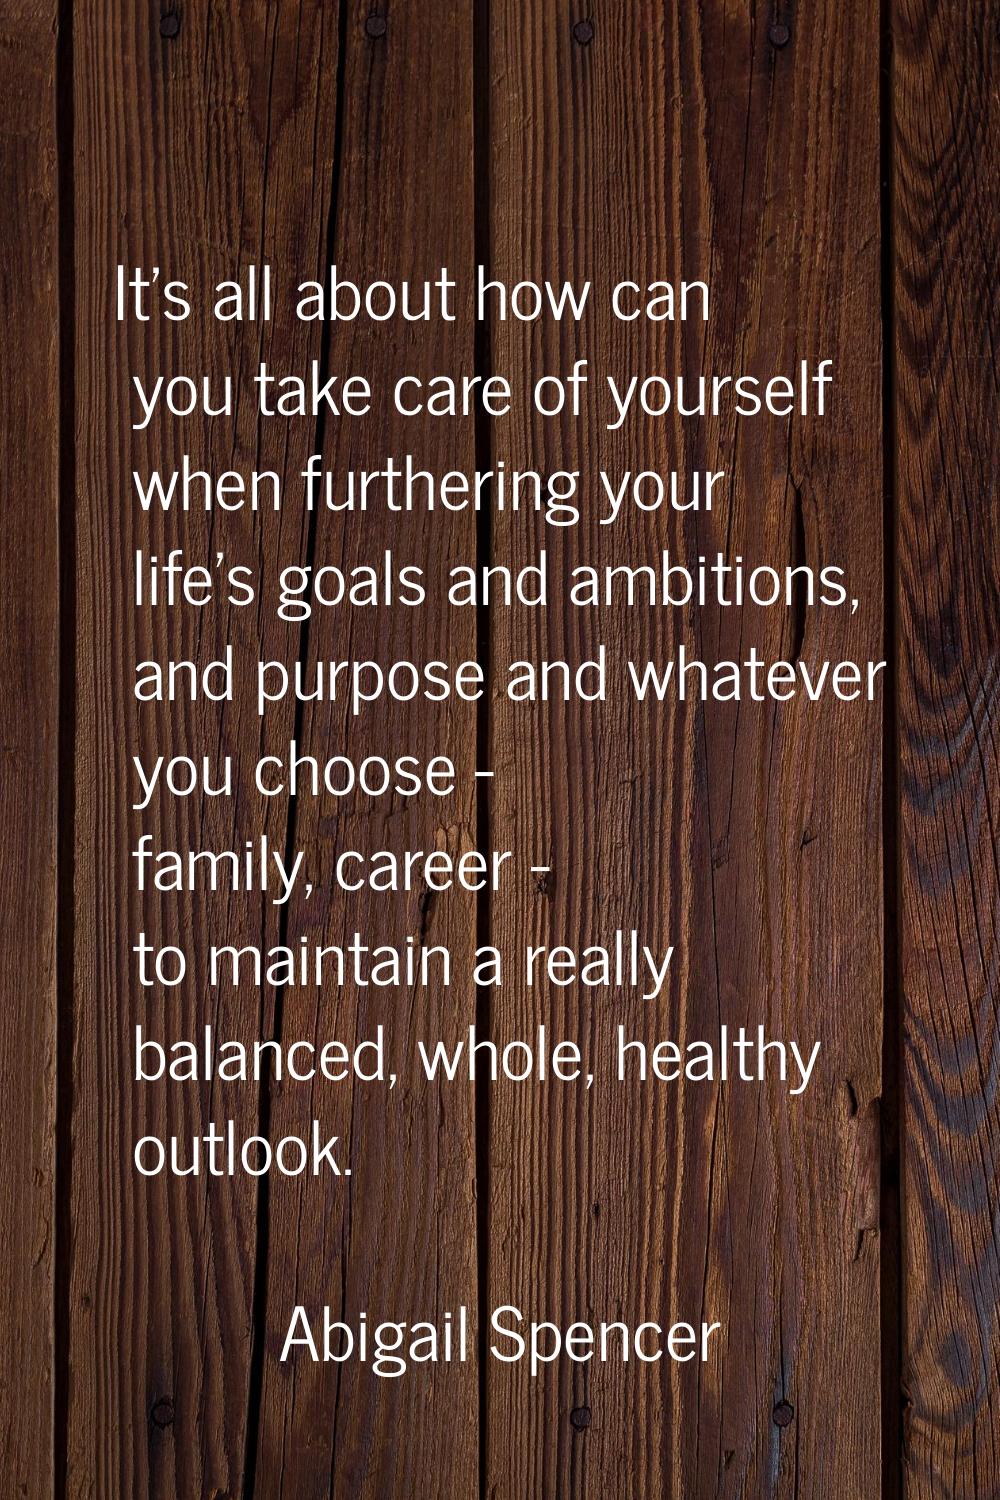 It's all about how can you take care of yourself when furthering your life's goals and ambitions, a